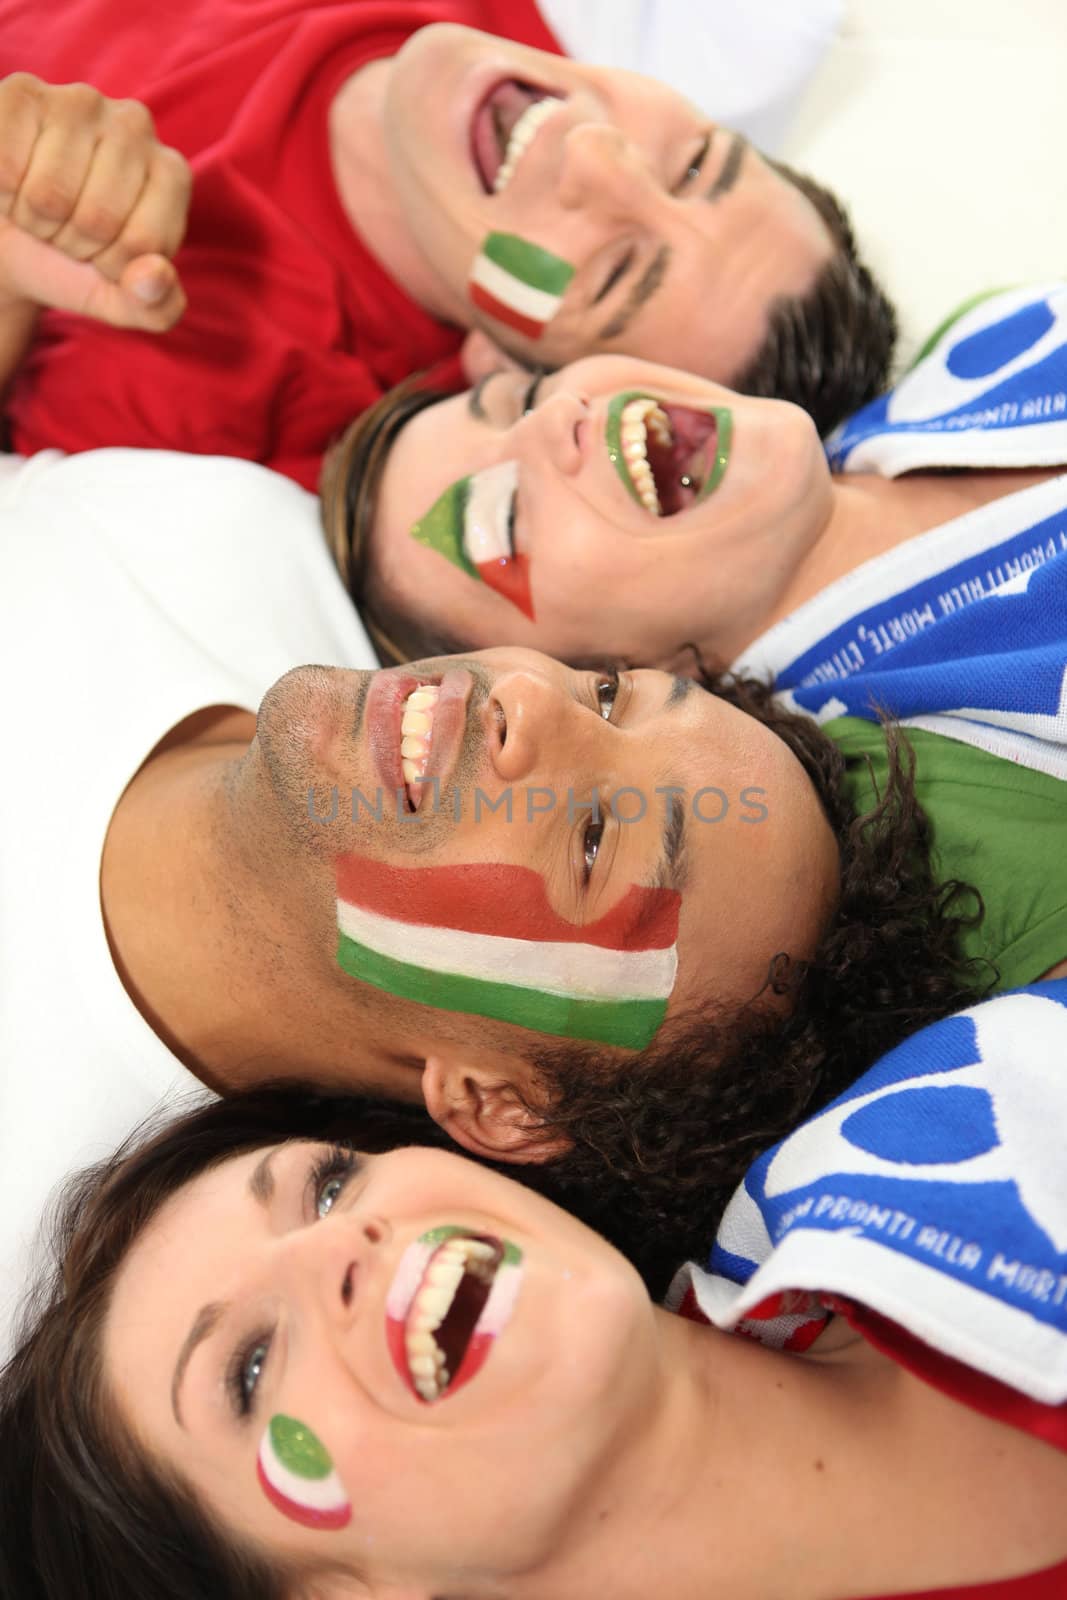 Italy supporters screaming by phovoir